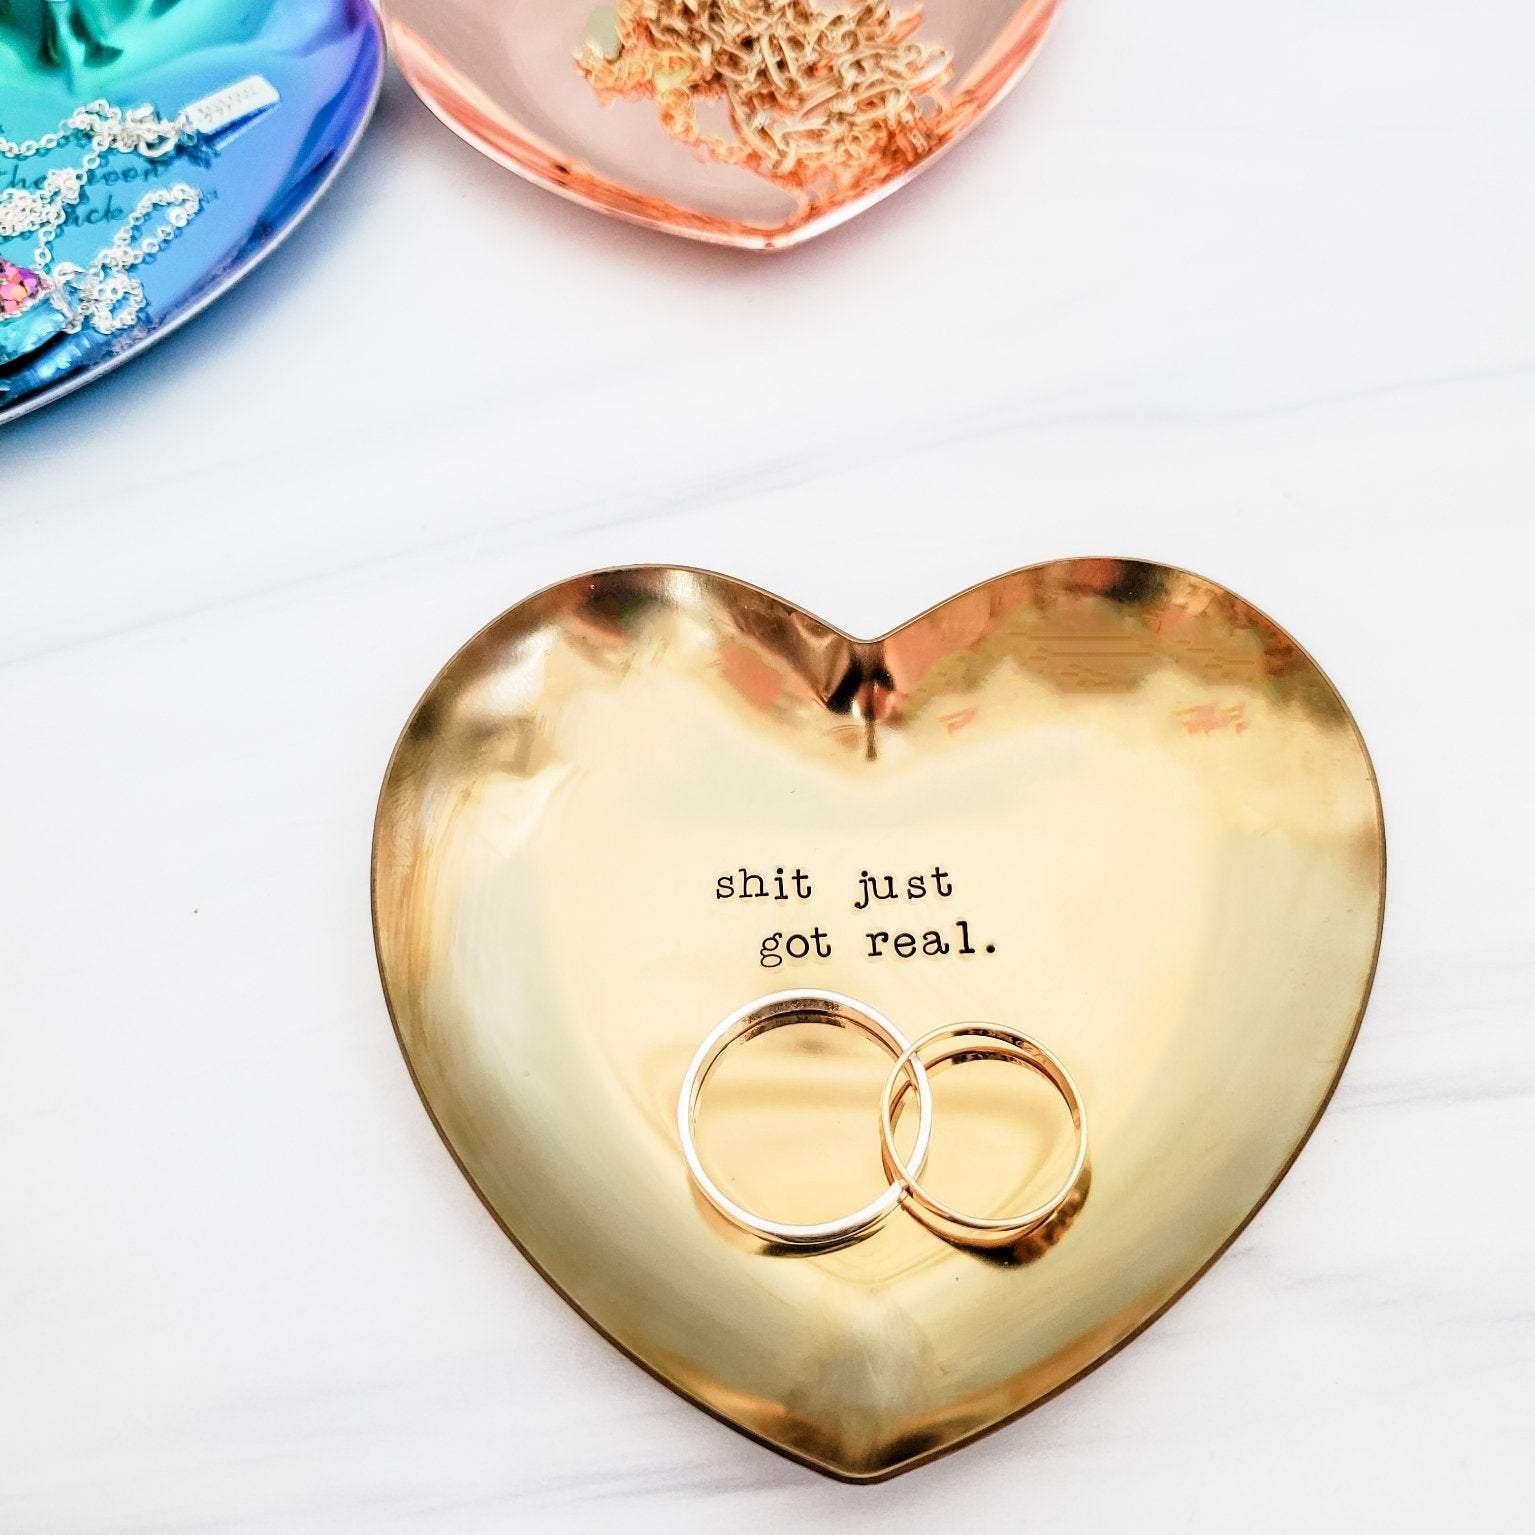 The Best is Yet to Come Heart-Shaped Engagement Ring Dish Salt and Sparkle